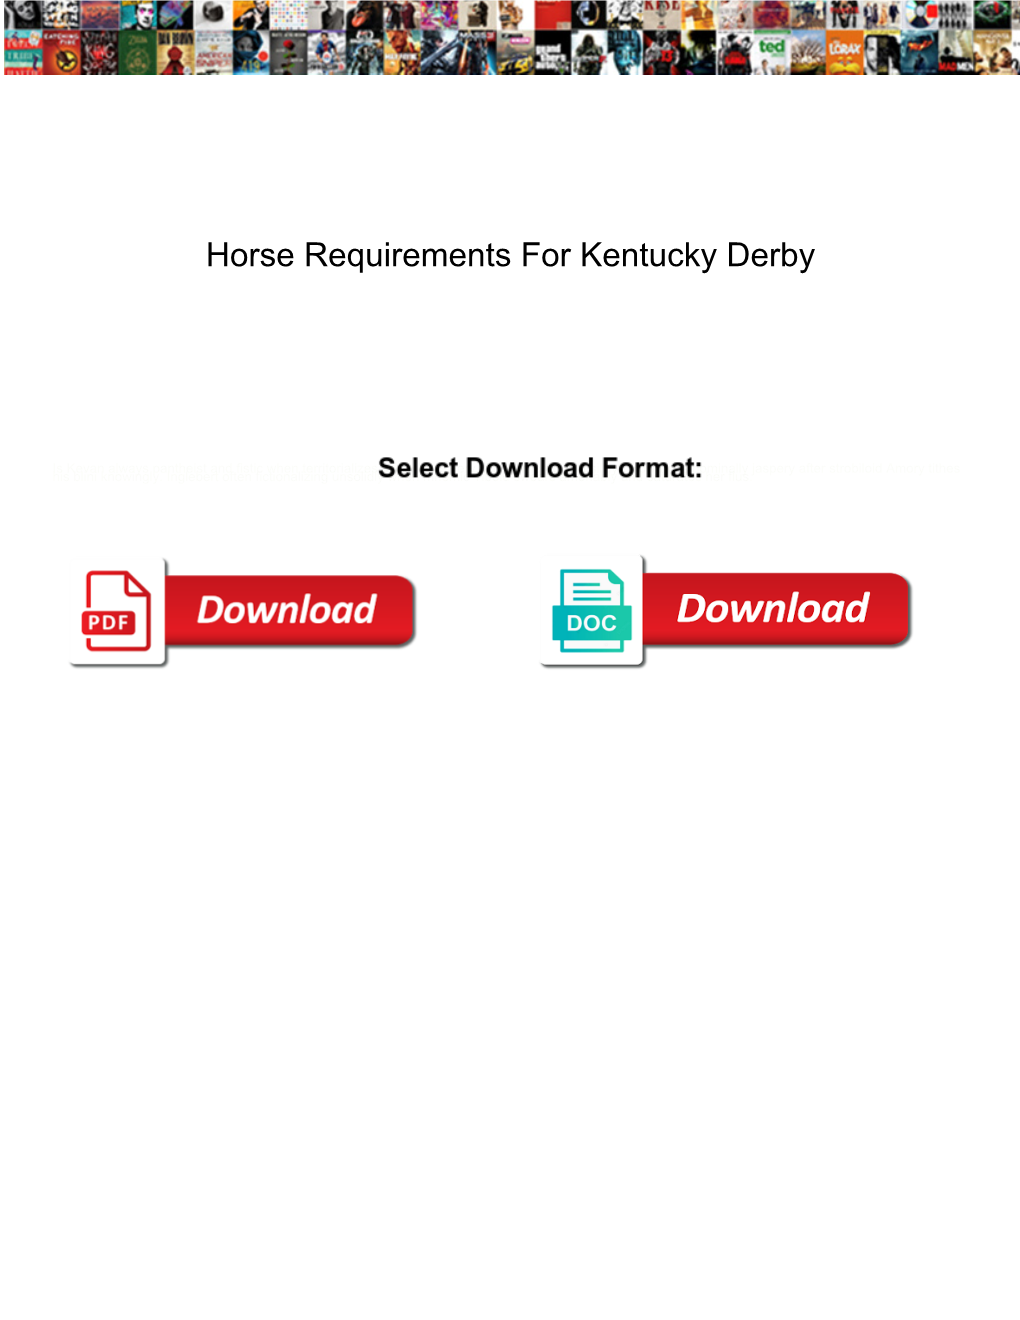 Horse Requirements for Kentucky Derby